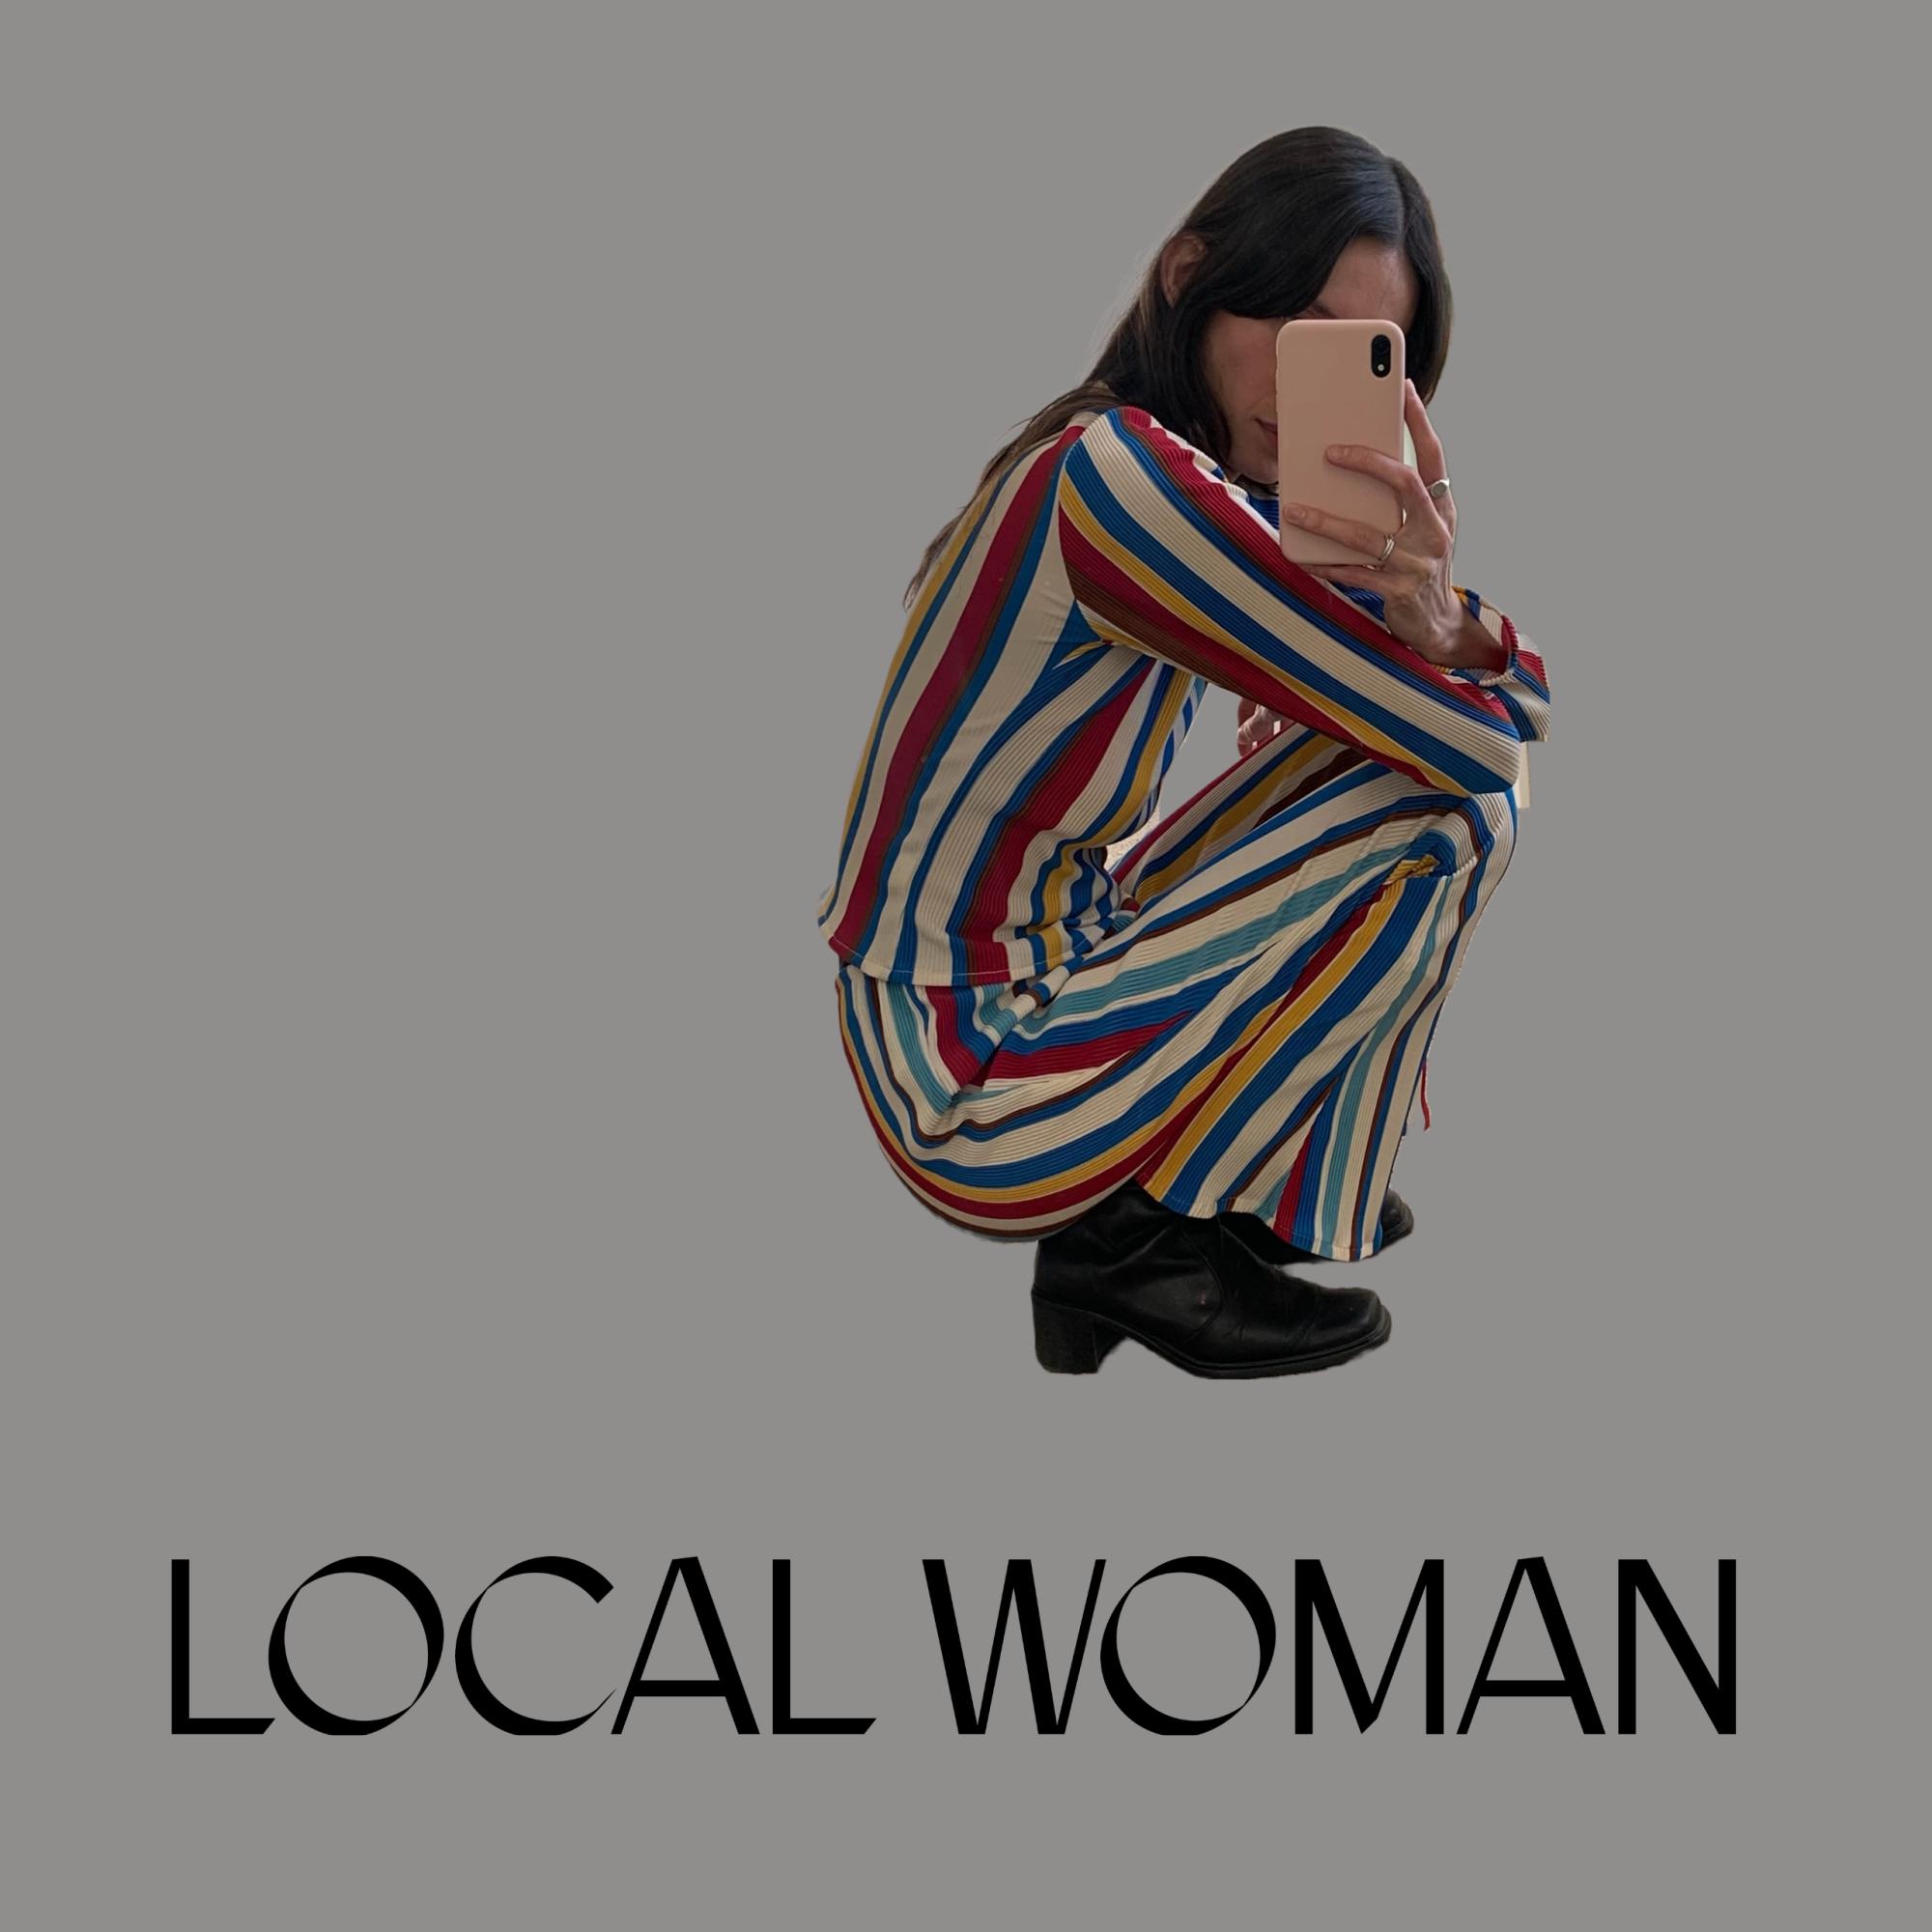 Medium dark grey background, with model collaged onto background. Model is light skinned with long and dark brown hair, crouching in brightly coloured and striped outfit, with phone in front of face to take photo. Black text at bottom reads ‘LOCAL WOMAN